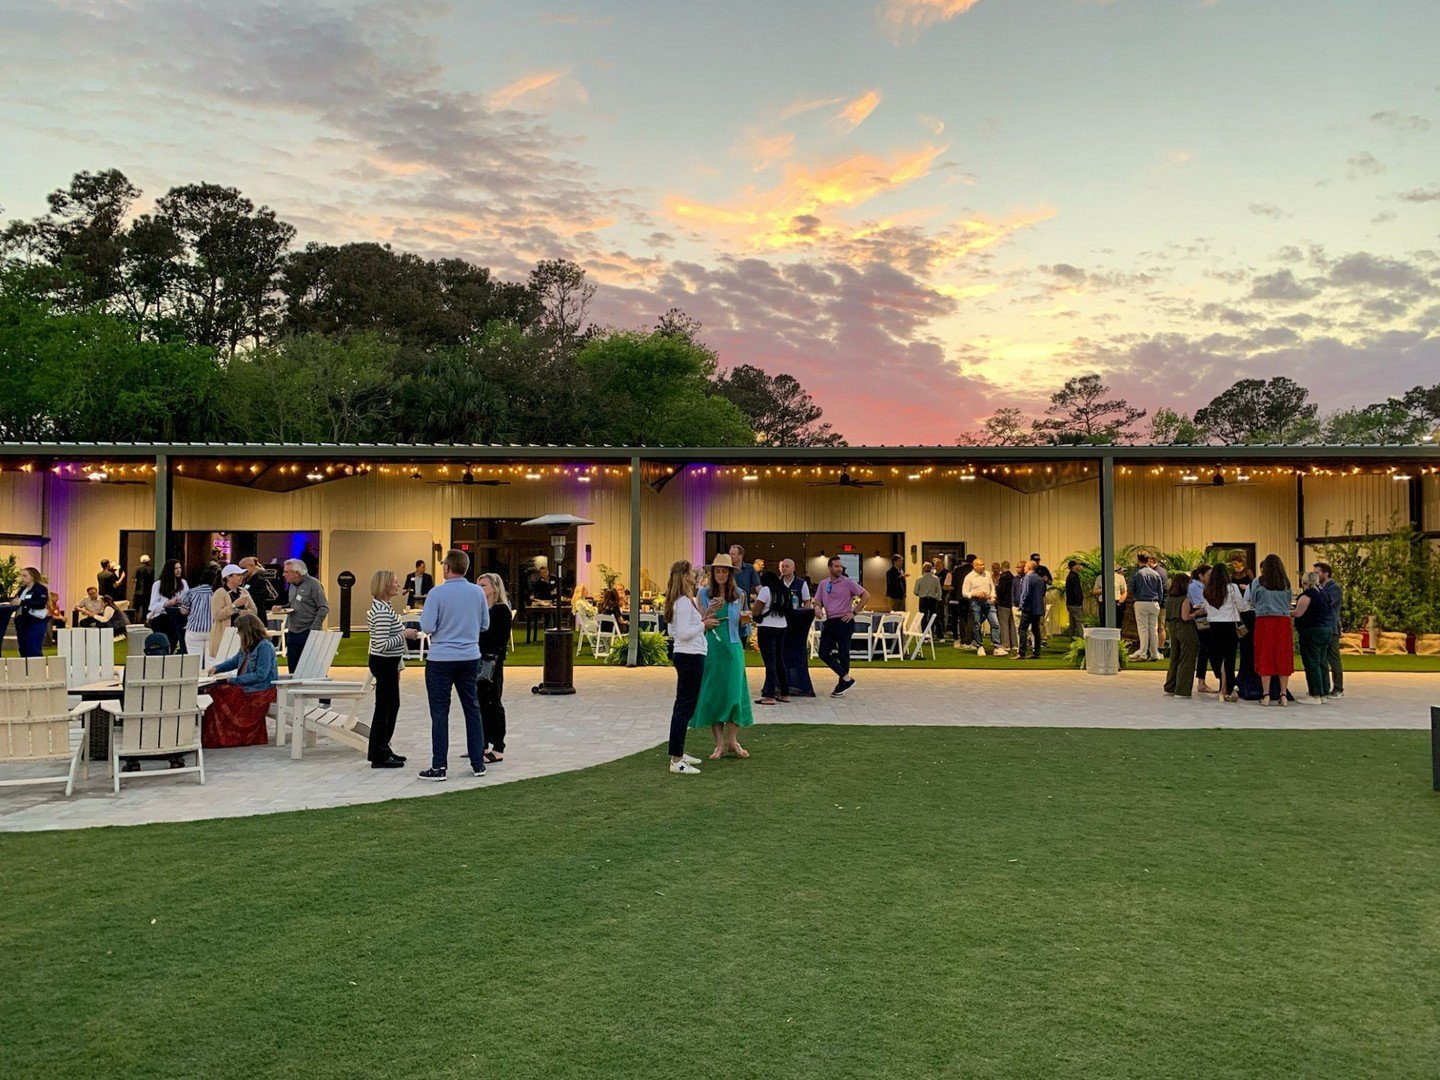 SUMMER EVENT SPECIALS! ☀🎉⁣
⁣
Book an event date for June, July, August, or September 2024 in the Greenhouse or Party Pavilion and get a DISCOUNT on your event rental!* 🤩⁣
⁣
Email caroline@playtheyards.com or call (904) 582-8540 today to set up a to